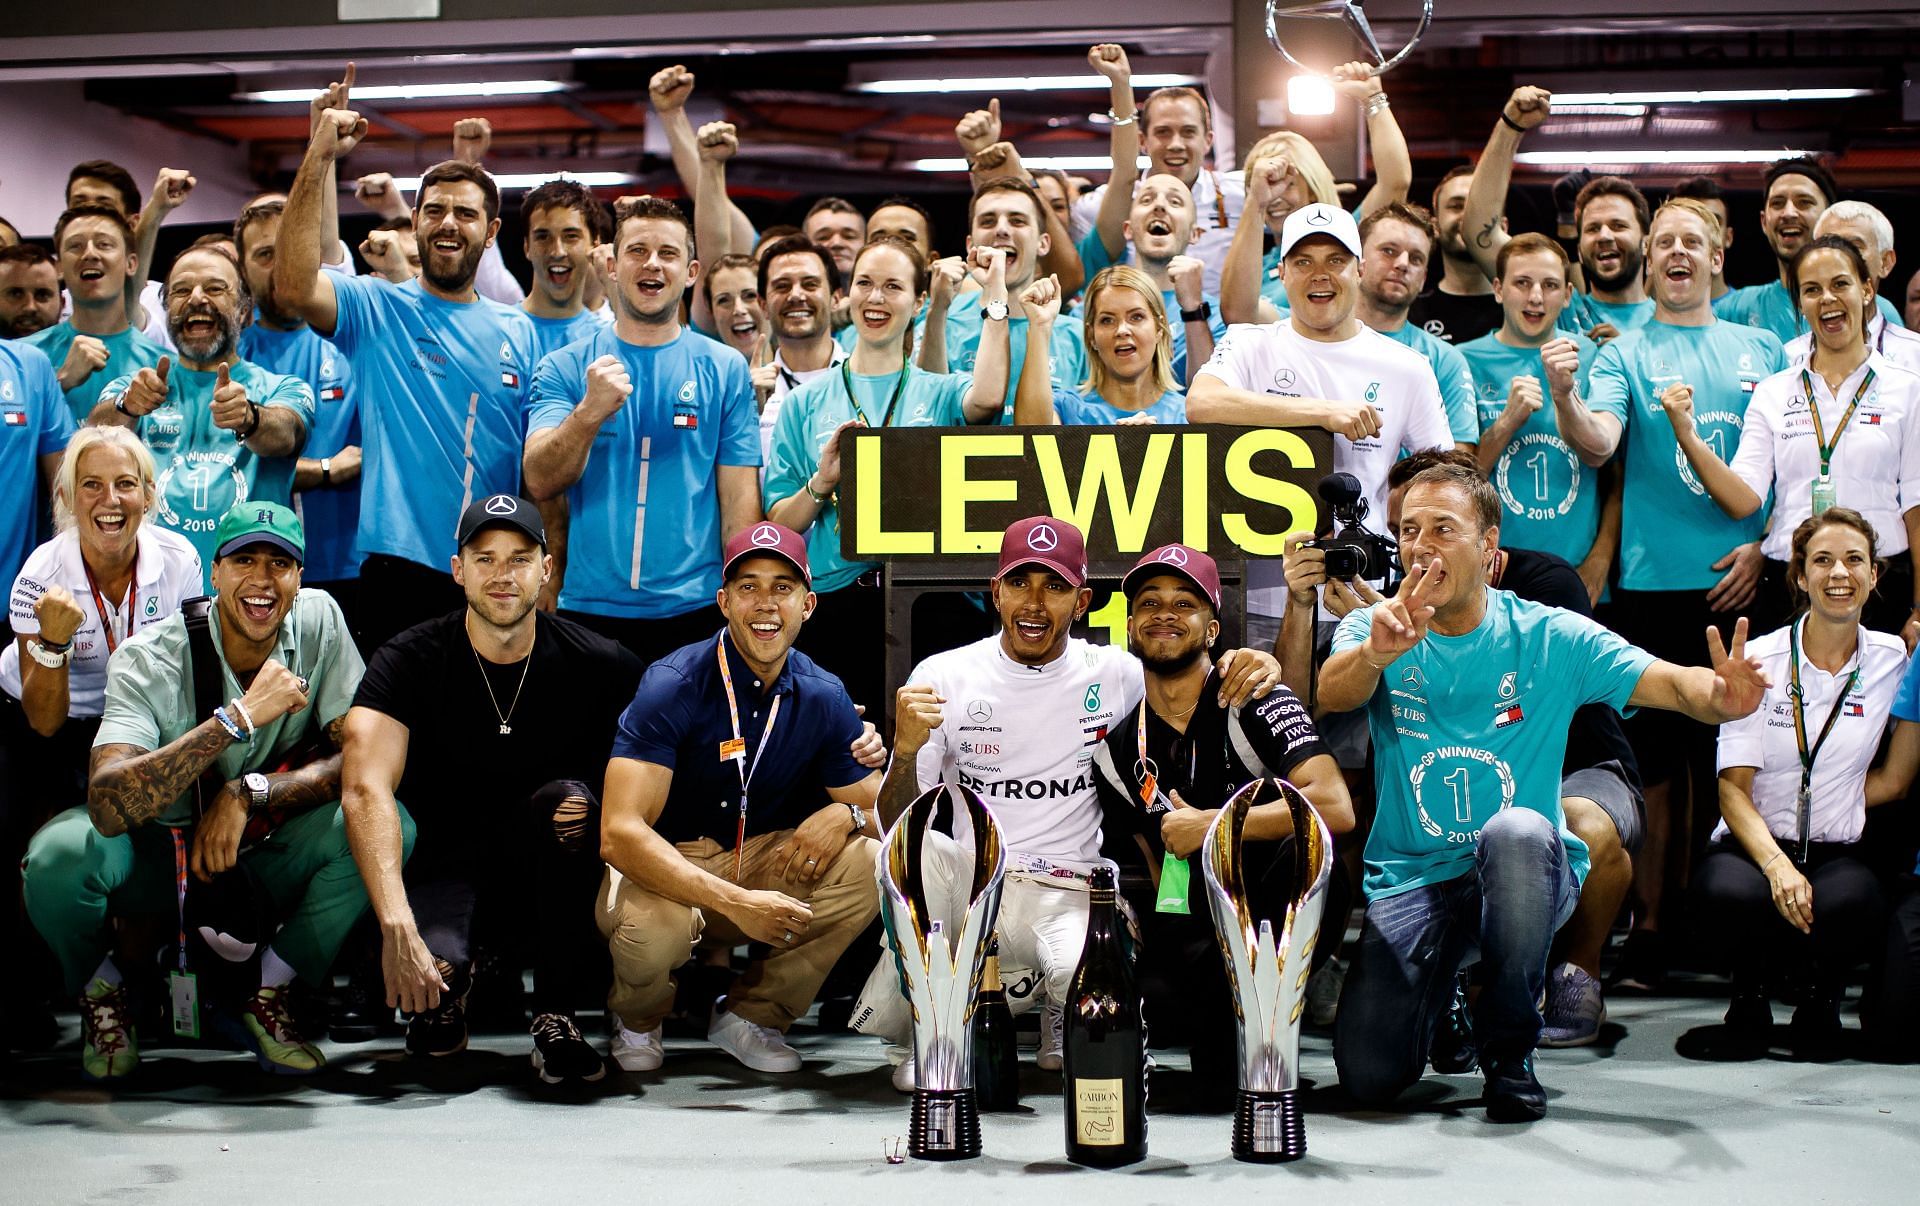 F1 Grand Prix of Singapore - Lewis Hamilton celebrates with his team after winning.